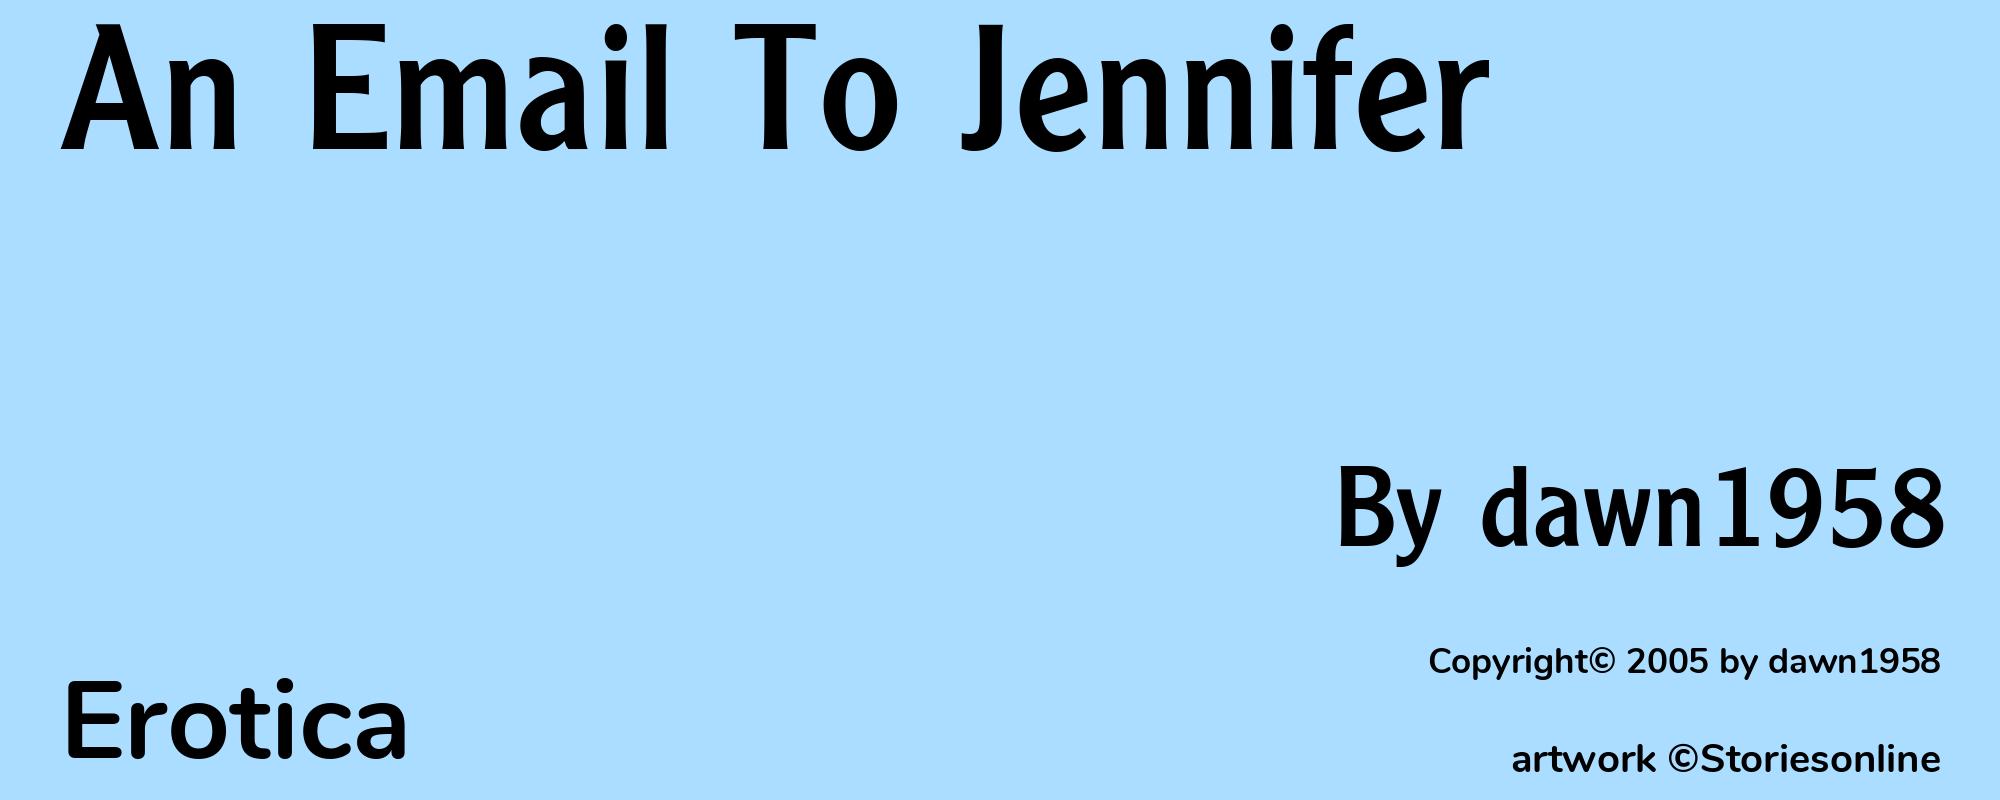 An Email To Jennifer - Cover